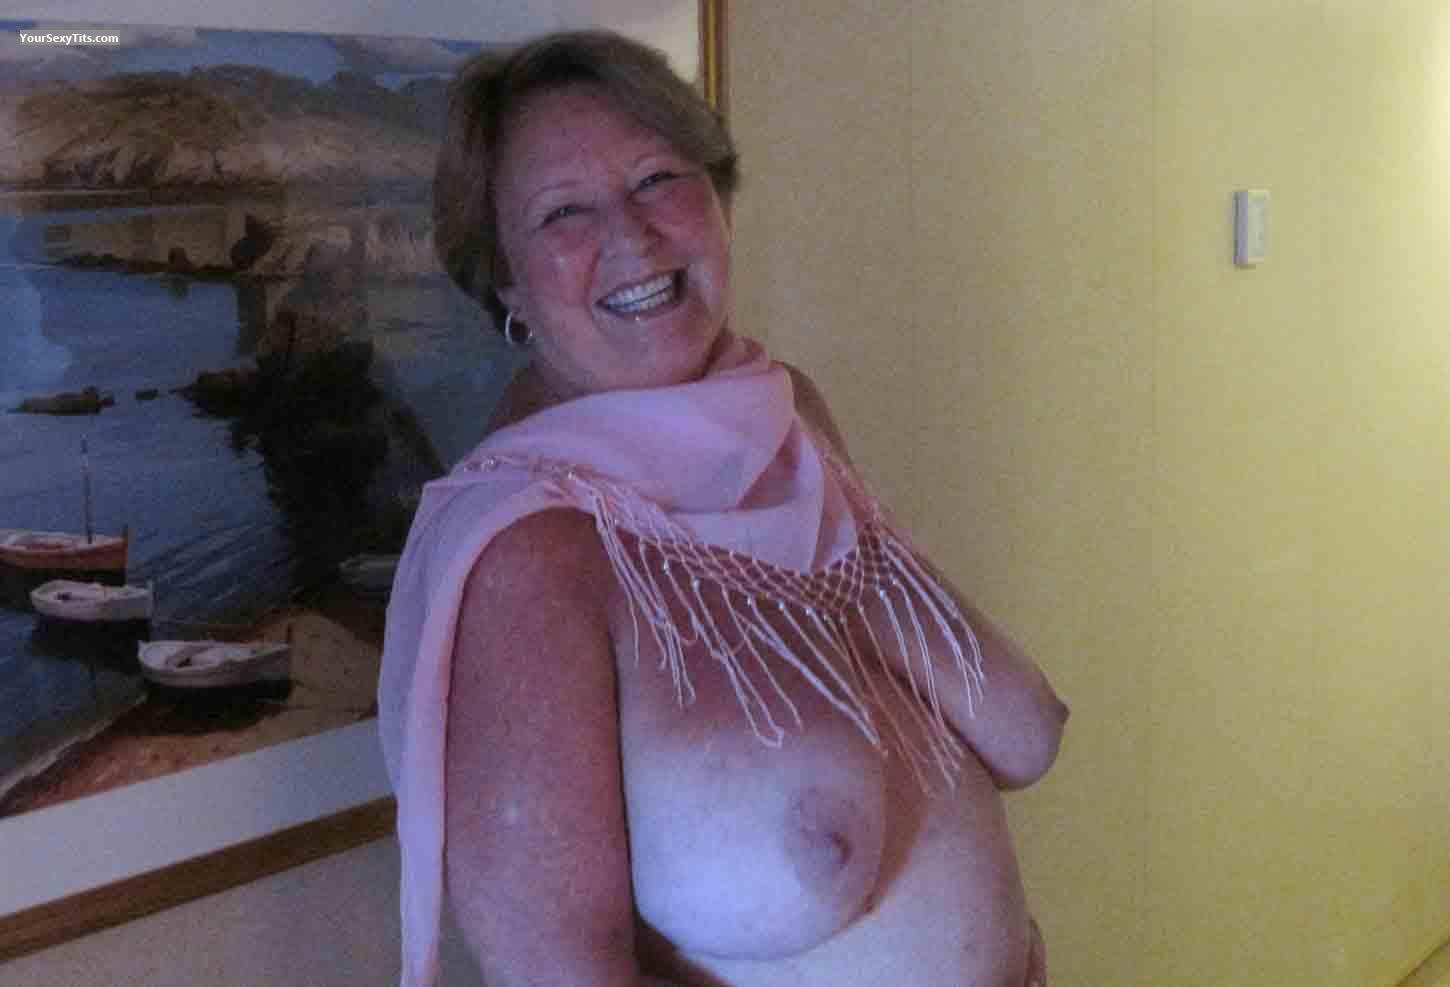 Tit Flash: Big Tits - Topless Ginger from United States